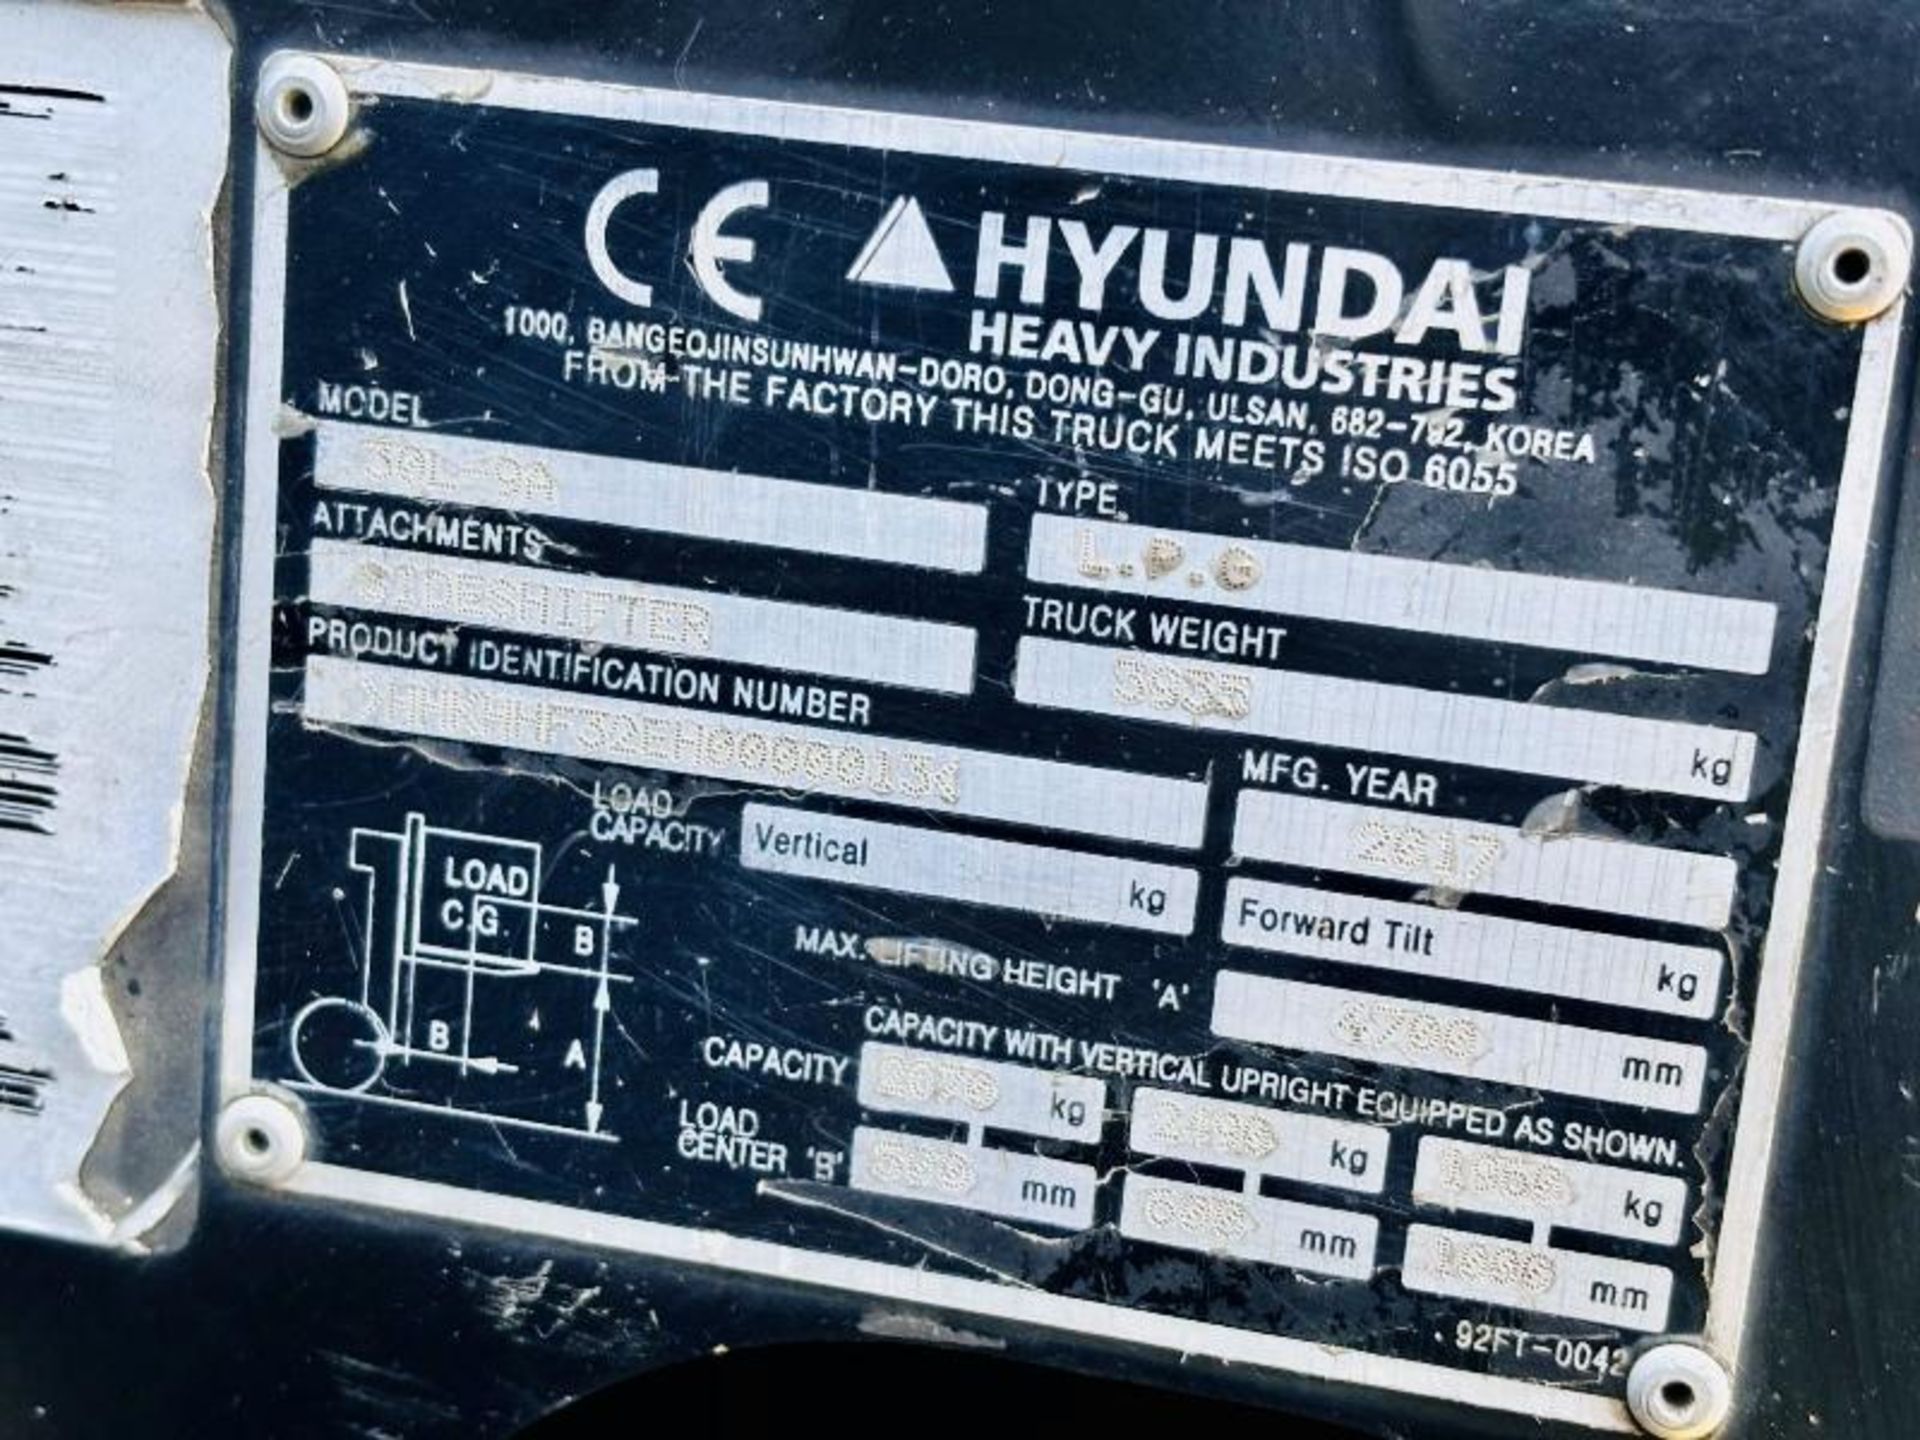 HYUNDAI 25L-9A CONTAINER SPEC FORKLIFT *YEAR 2017, 2956 HOURS* C/W SIDE SHIFT - Image 12 of 16